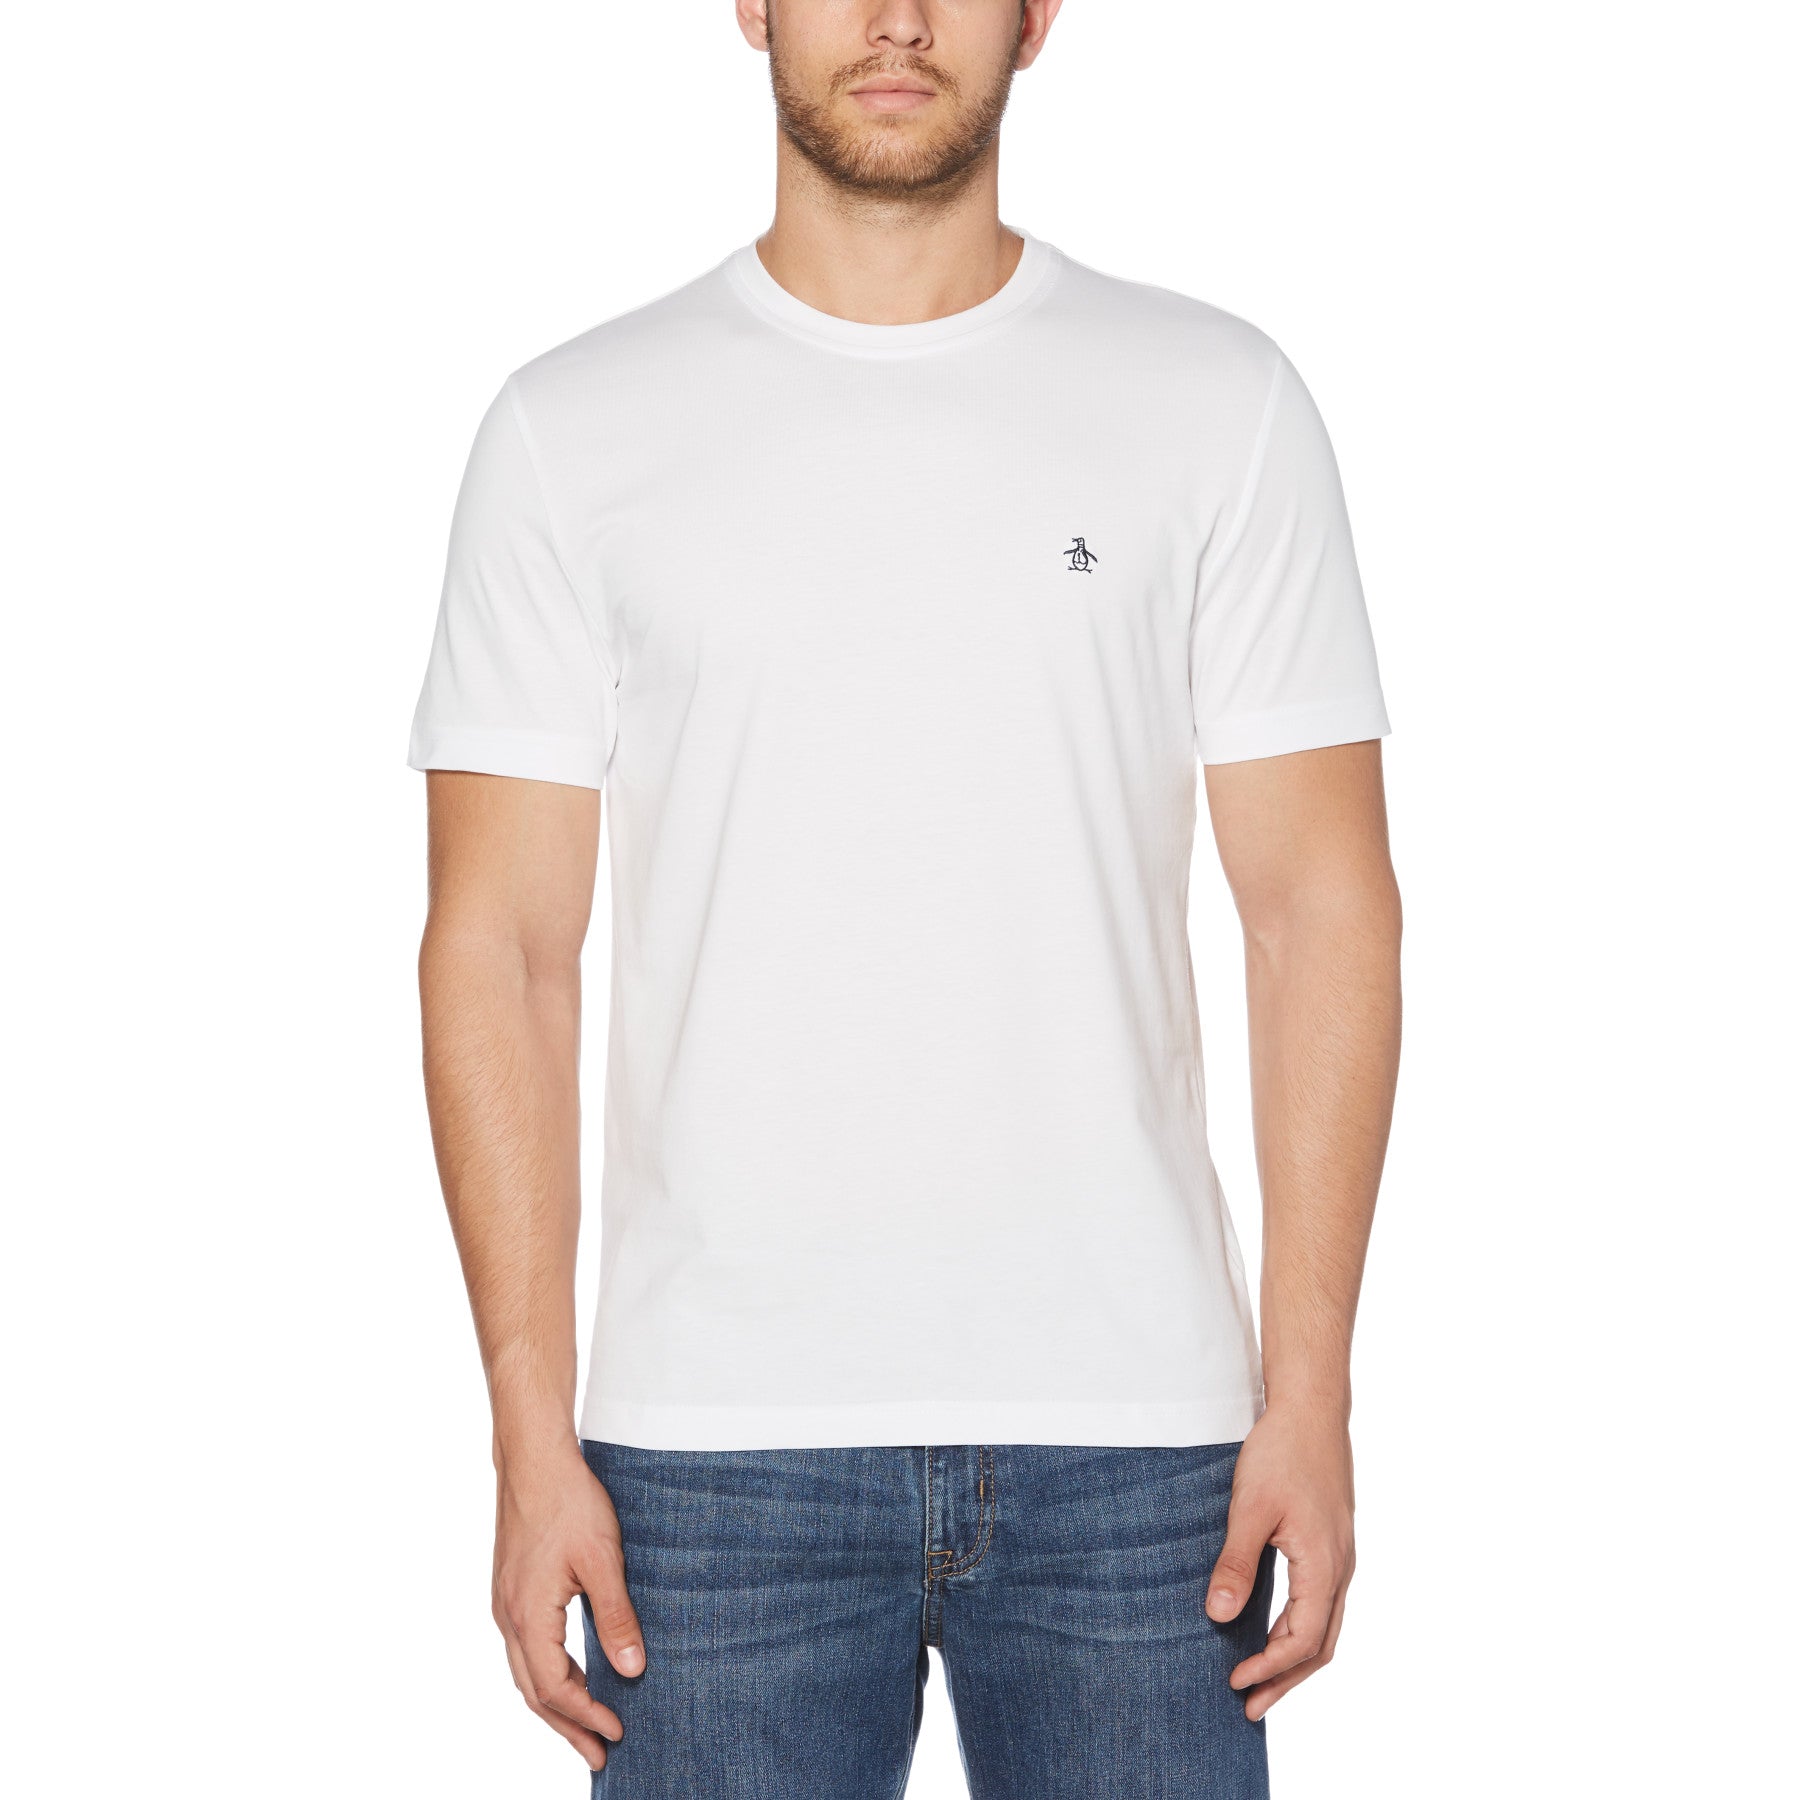 View Pin Point TShirt In Bright White information